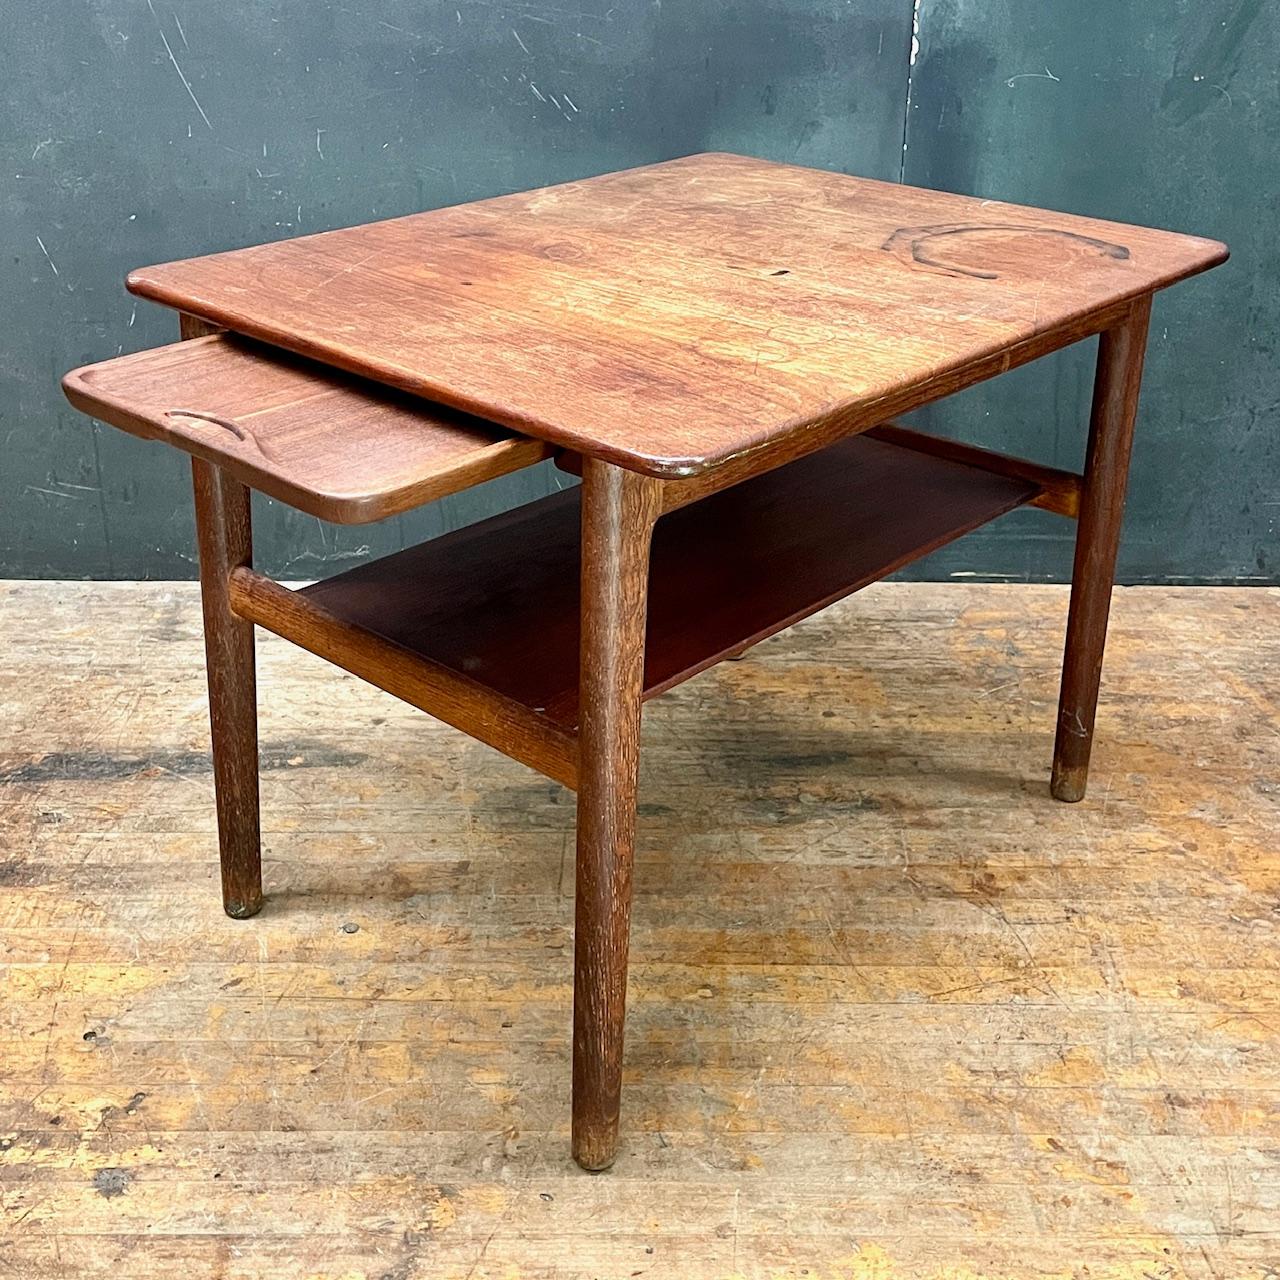 Tight joinery, fully functional. I prefer to keep my vintage and antique pieces in the condition it was at the time of procurement. The removable tray measures 21.25 in x 11.5 in. When extended with the tray on the table rails, the table depth